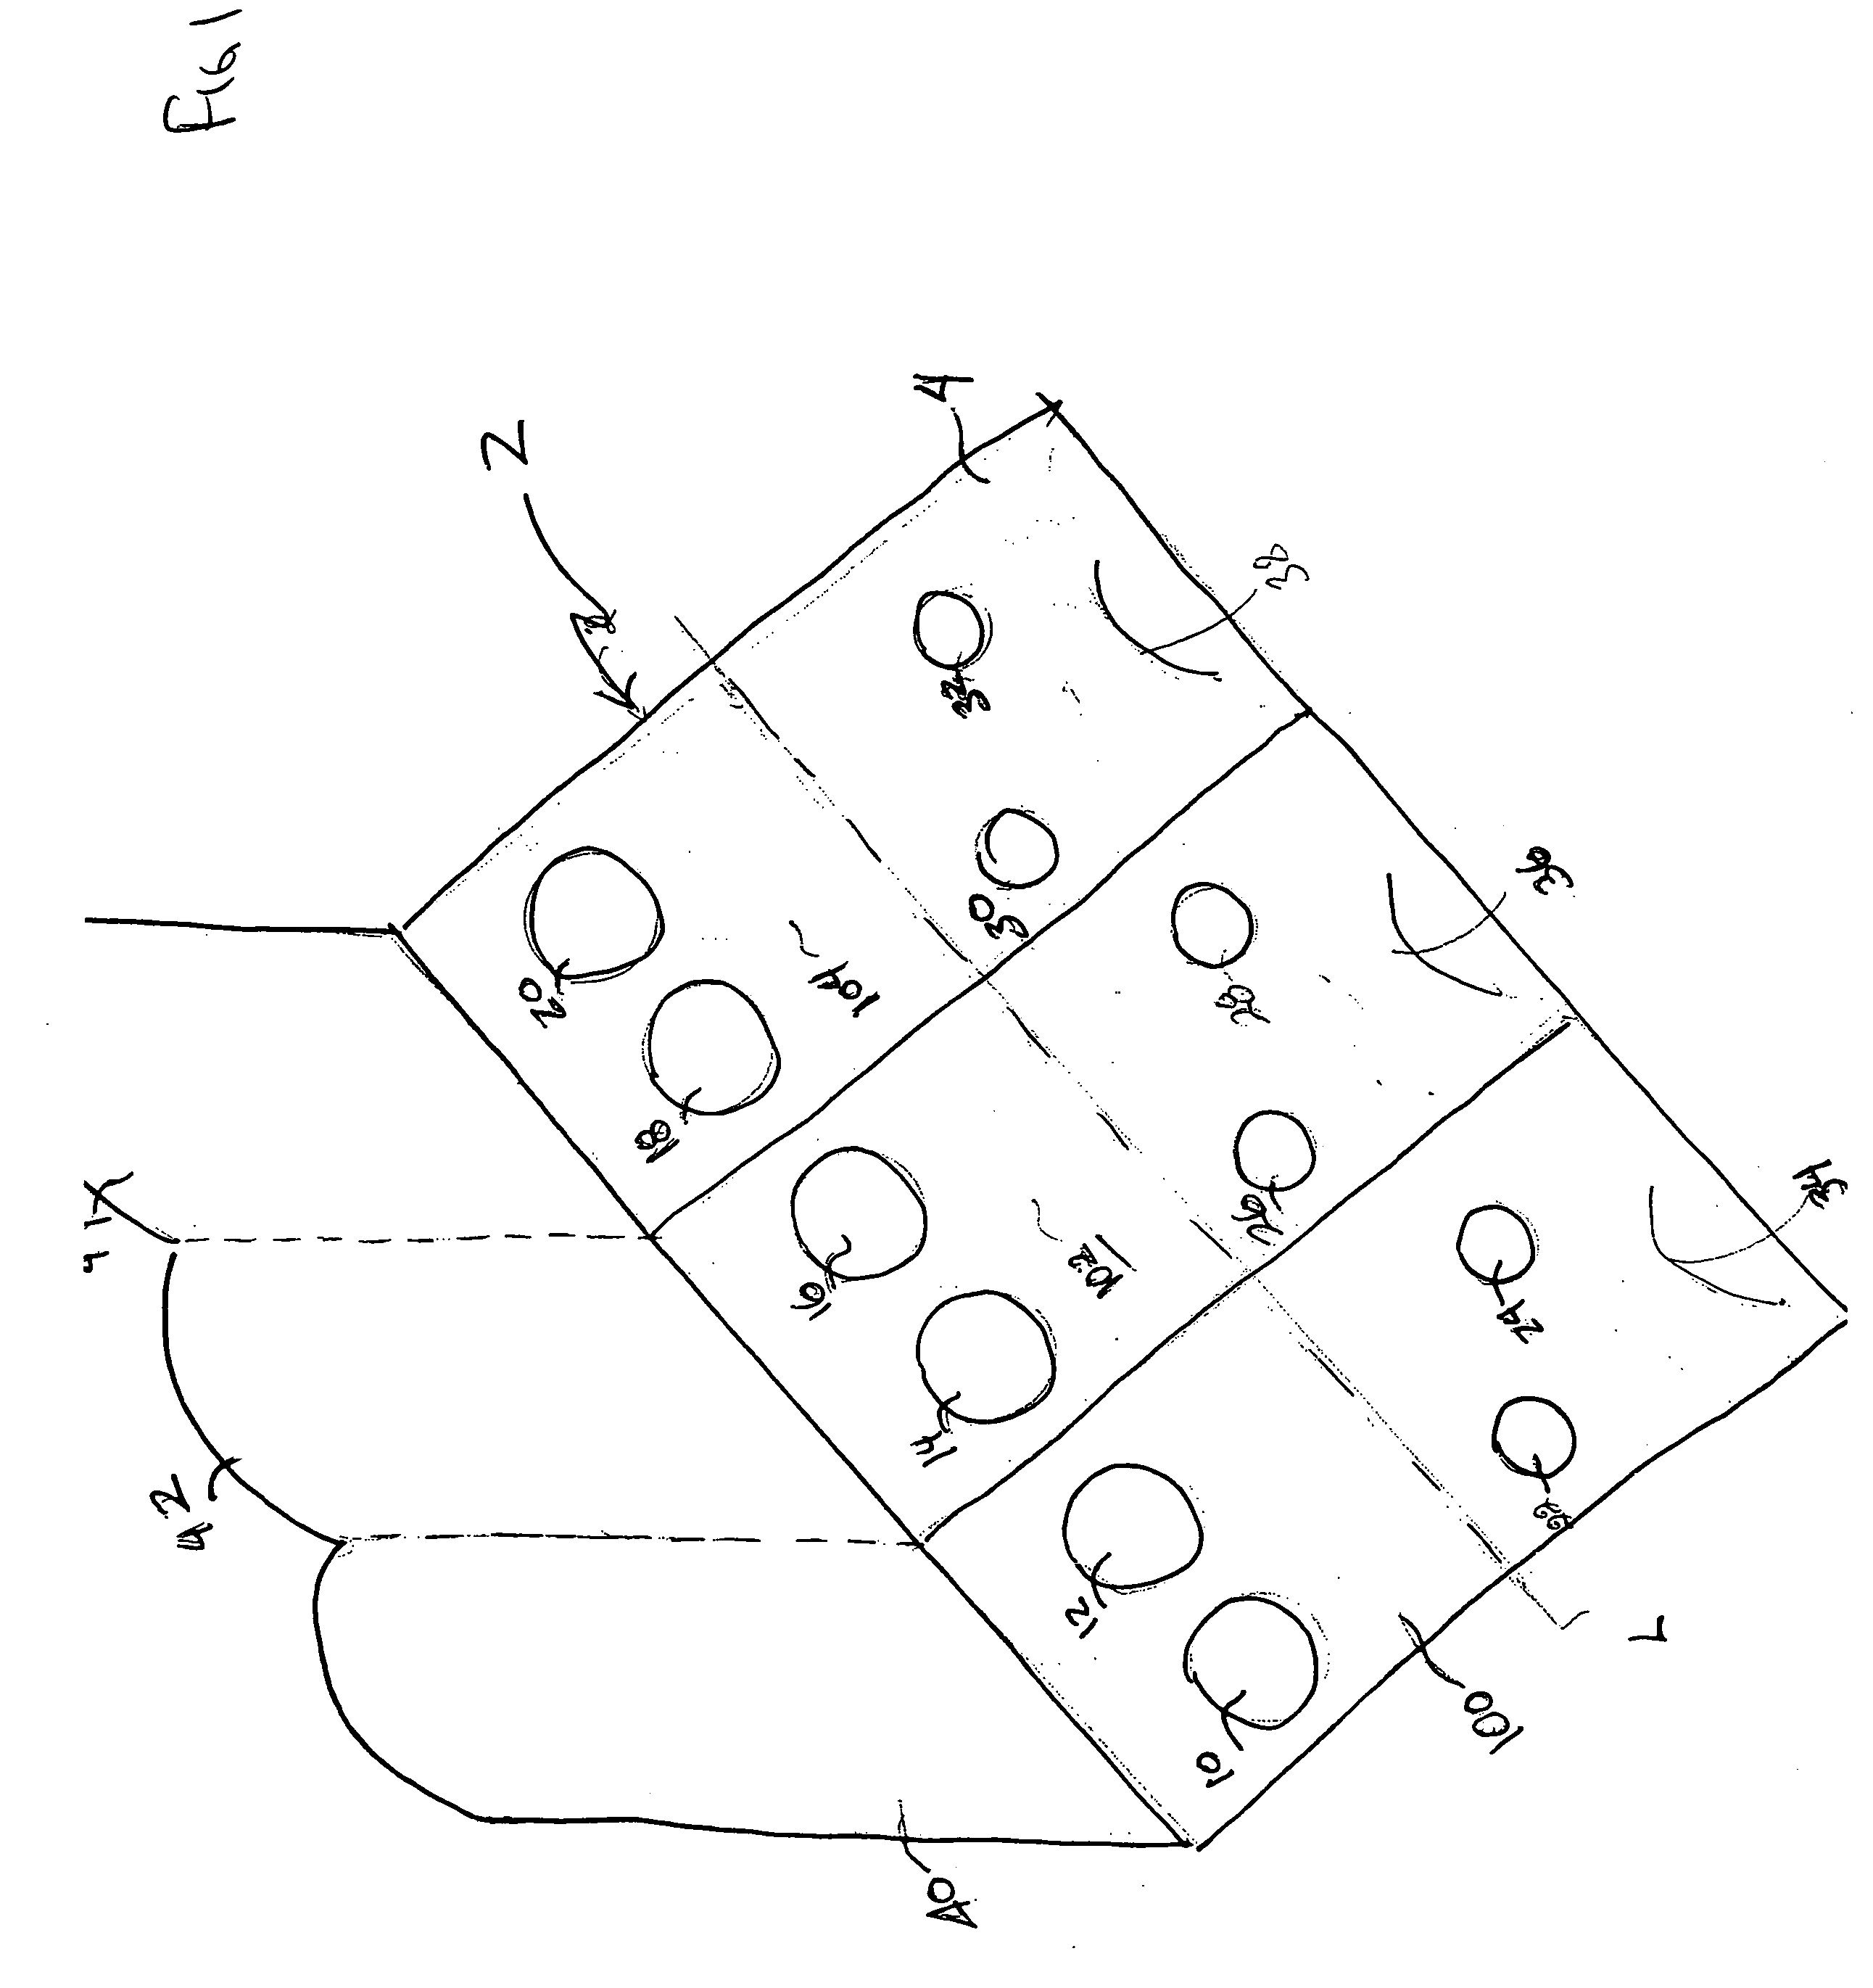 Fecal occult blood testing device and method